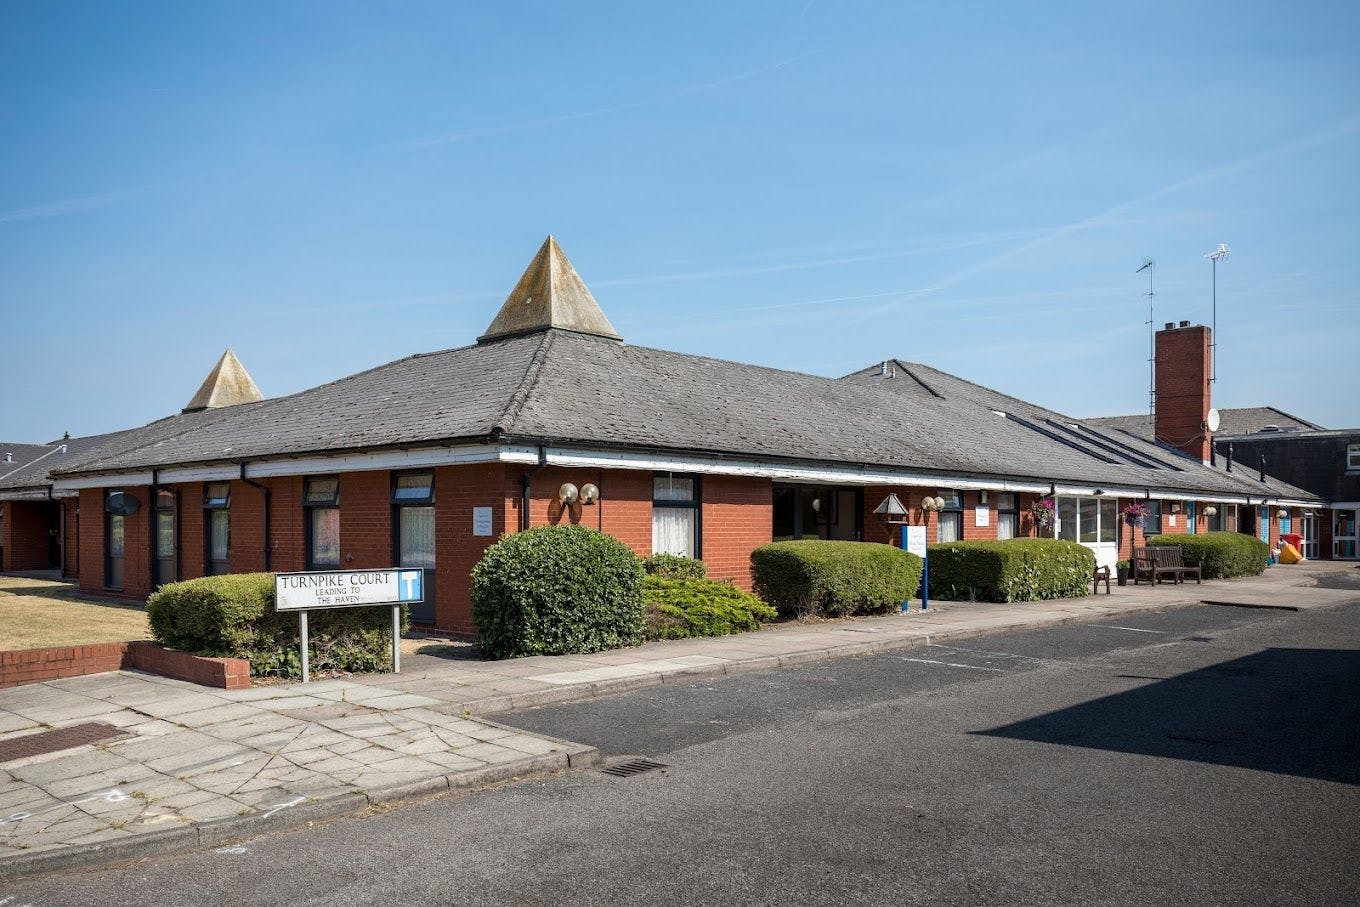 Minster Care Group - Turnpike Court care home 4